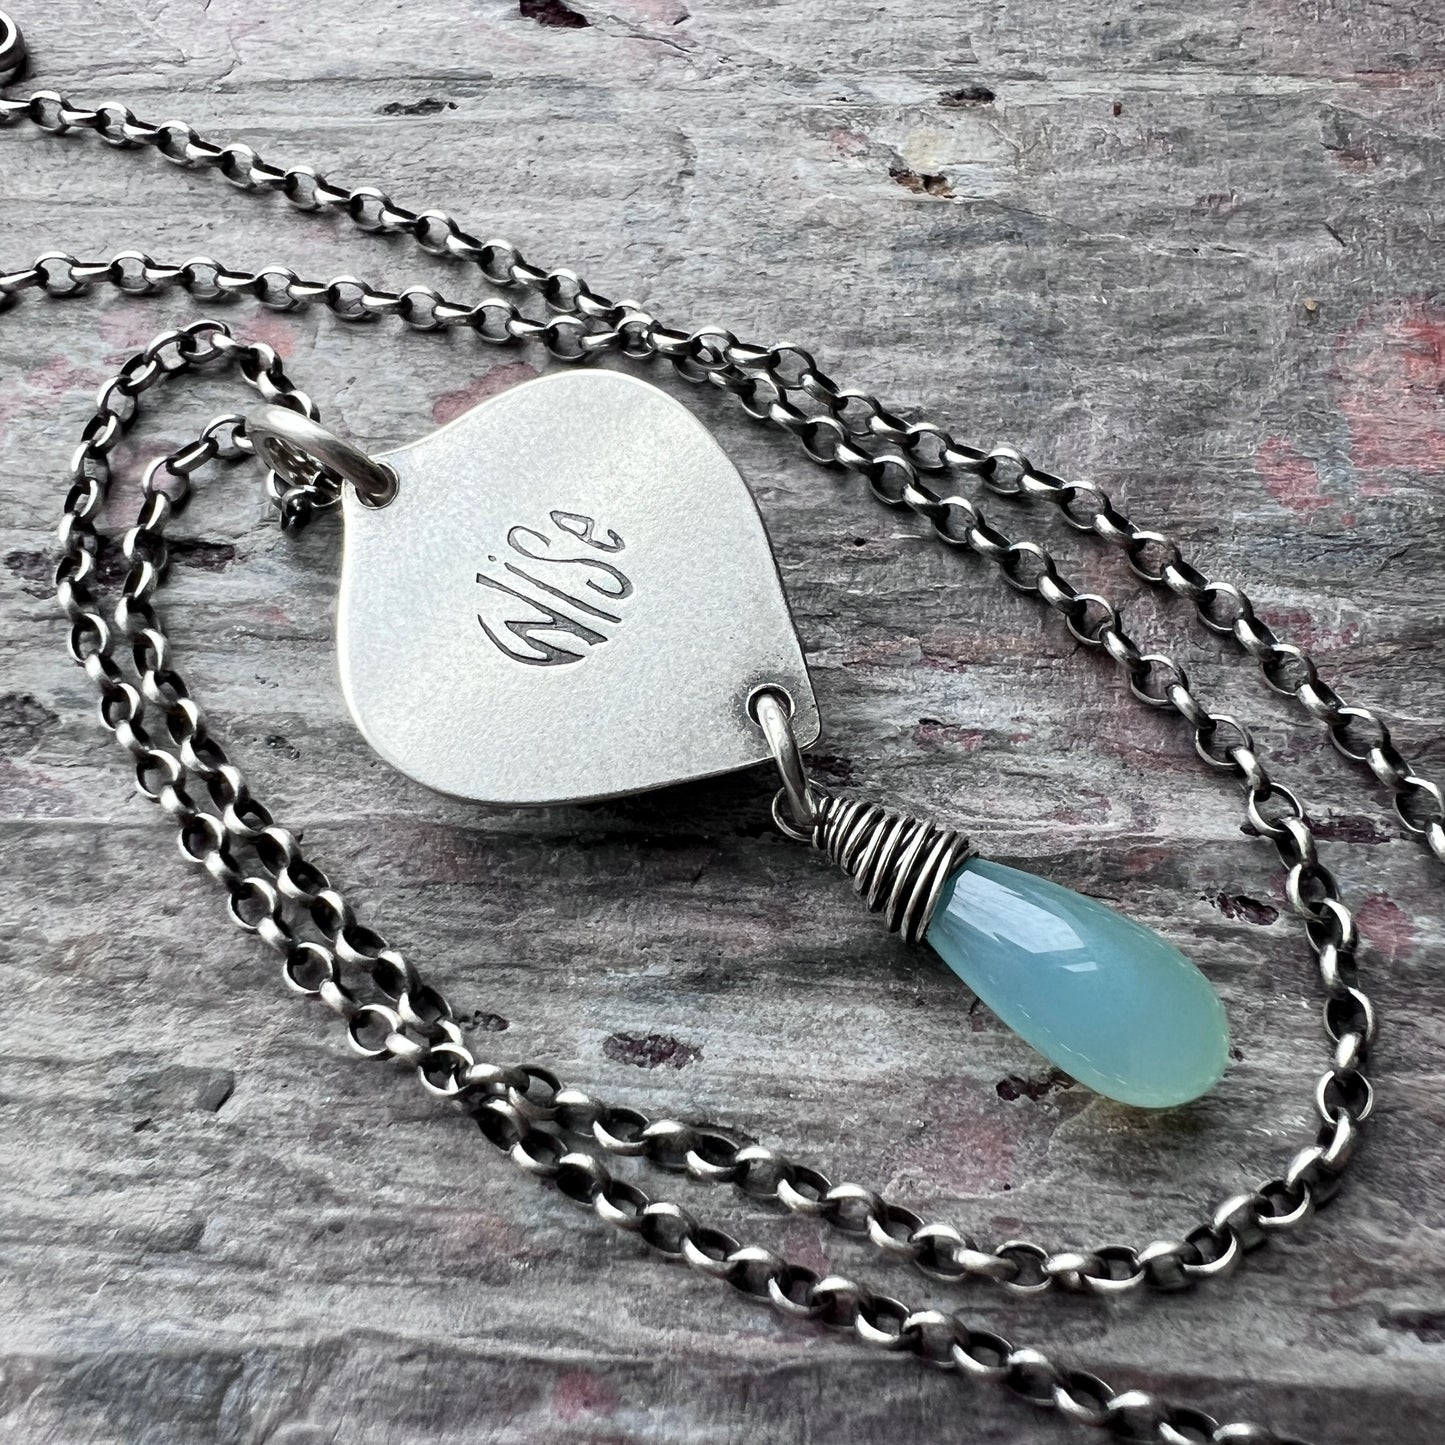 Turquoise Sterling Silver Necklace | Genuine Natural Turquoise and Chalcedony Pendant Necklace